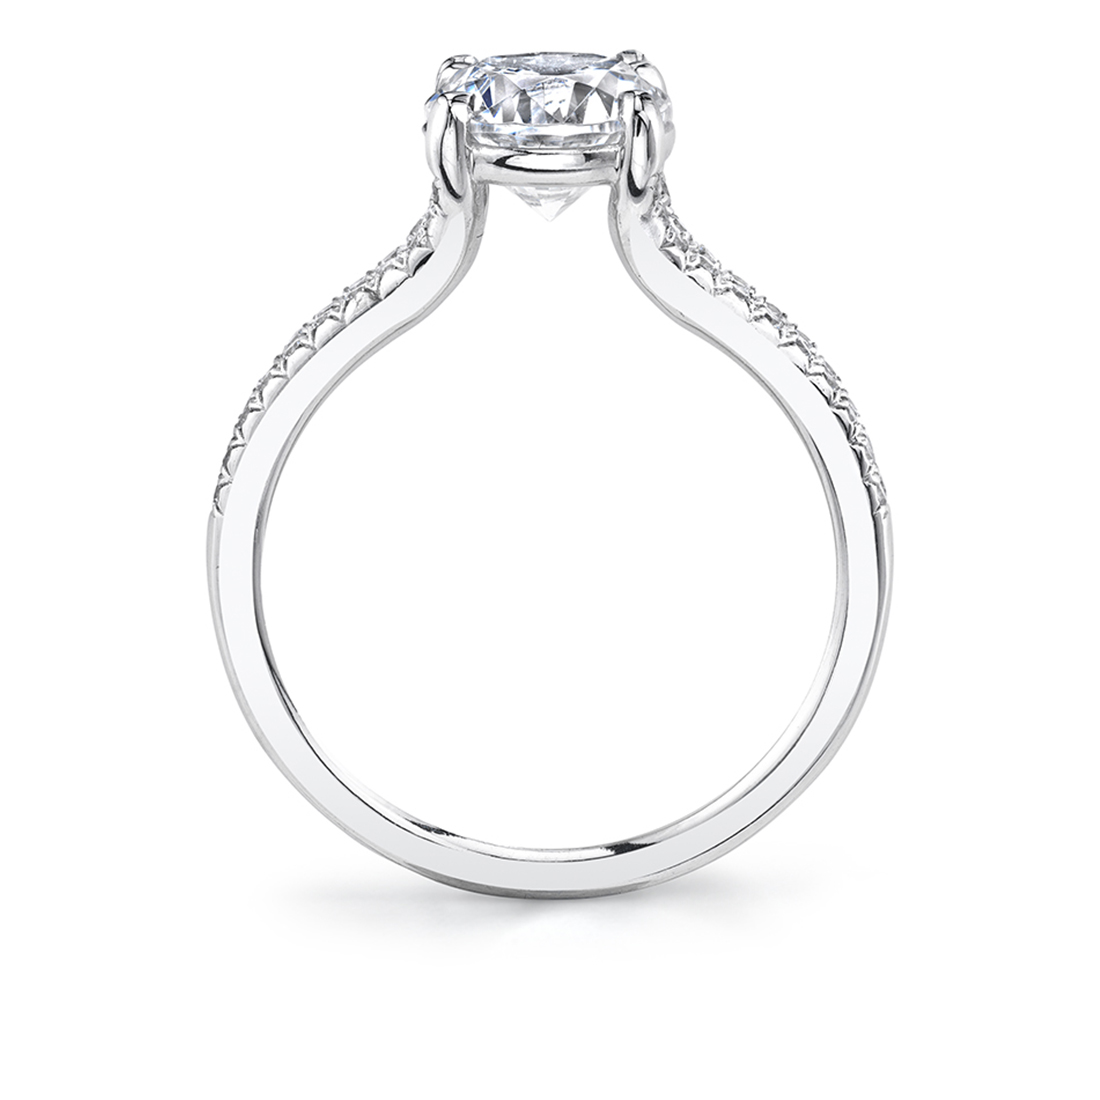 Profile Image of Split Band Engagement Ring in White Gold - Analia